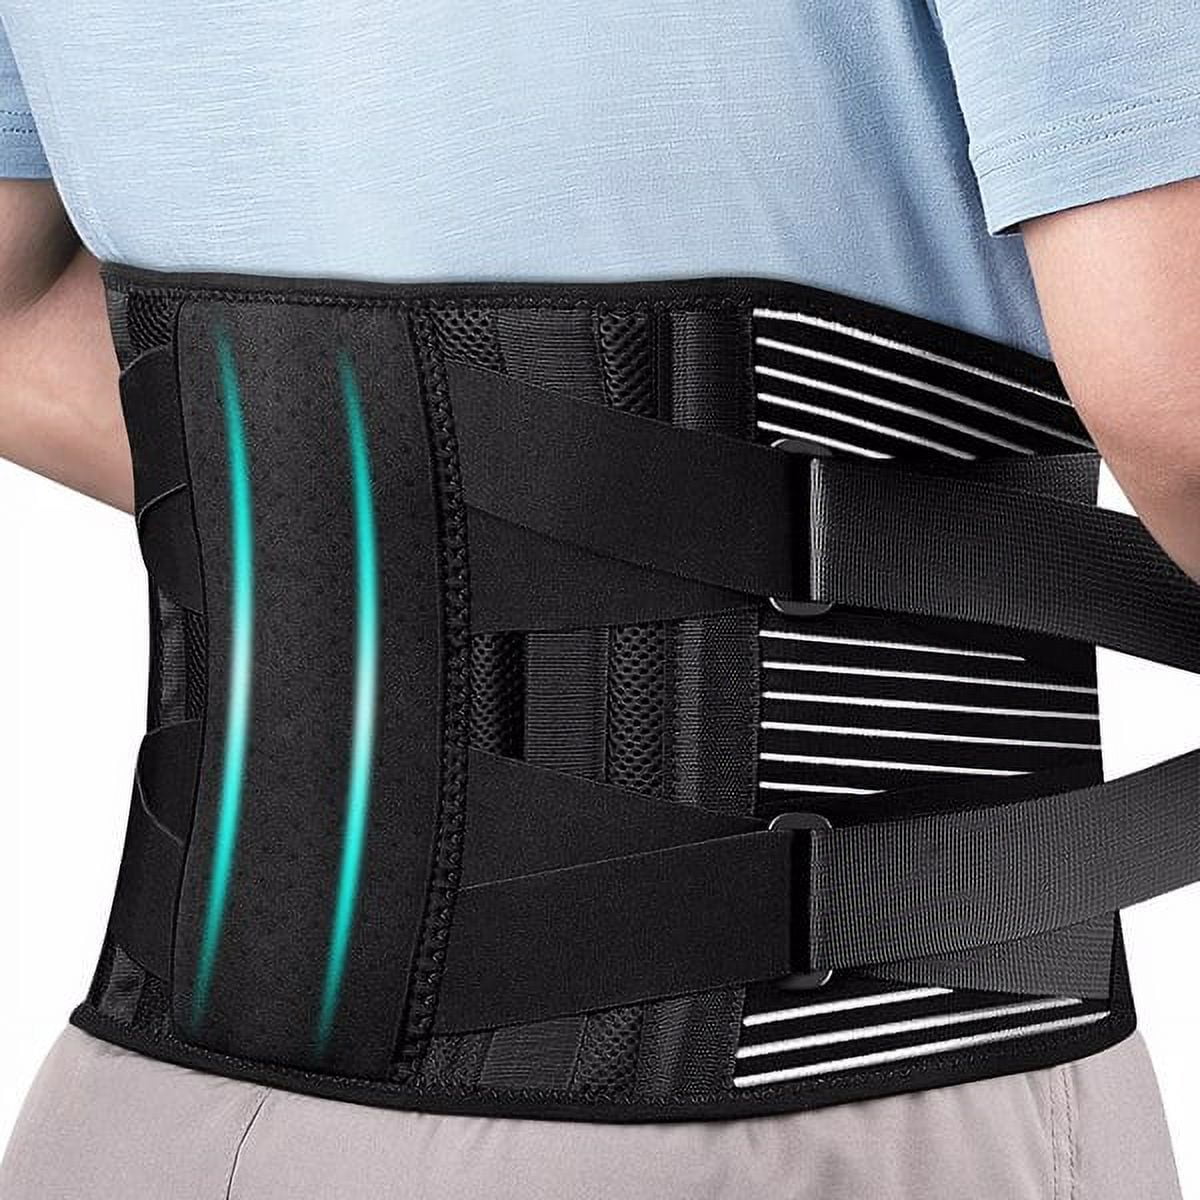 Adjustable Back Brace for Lower Back Pain Relief and Support - with Lumbar  Pad and Breathable Mesh Design - Size M 23.6-31.5 Waist